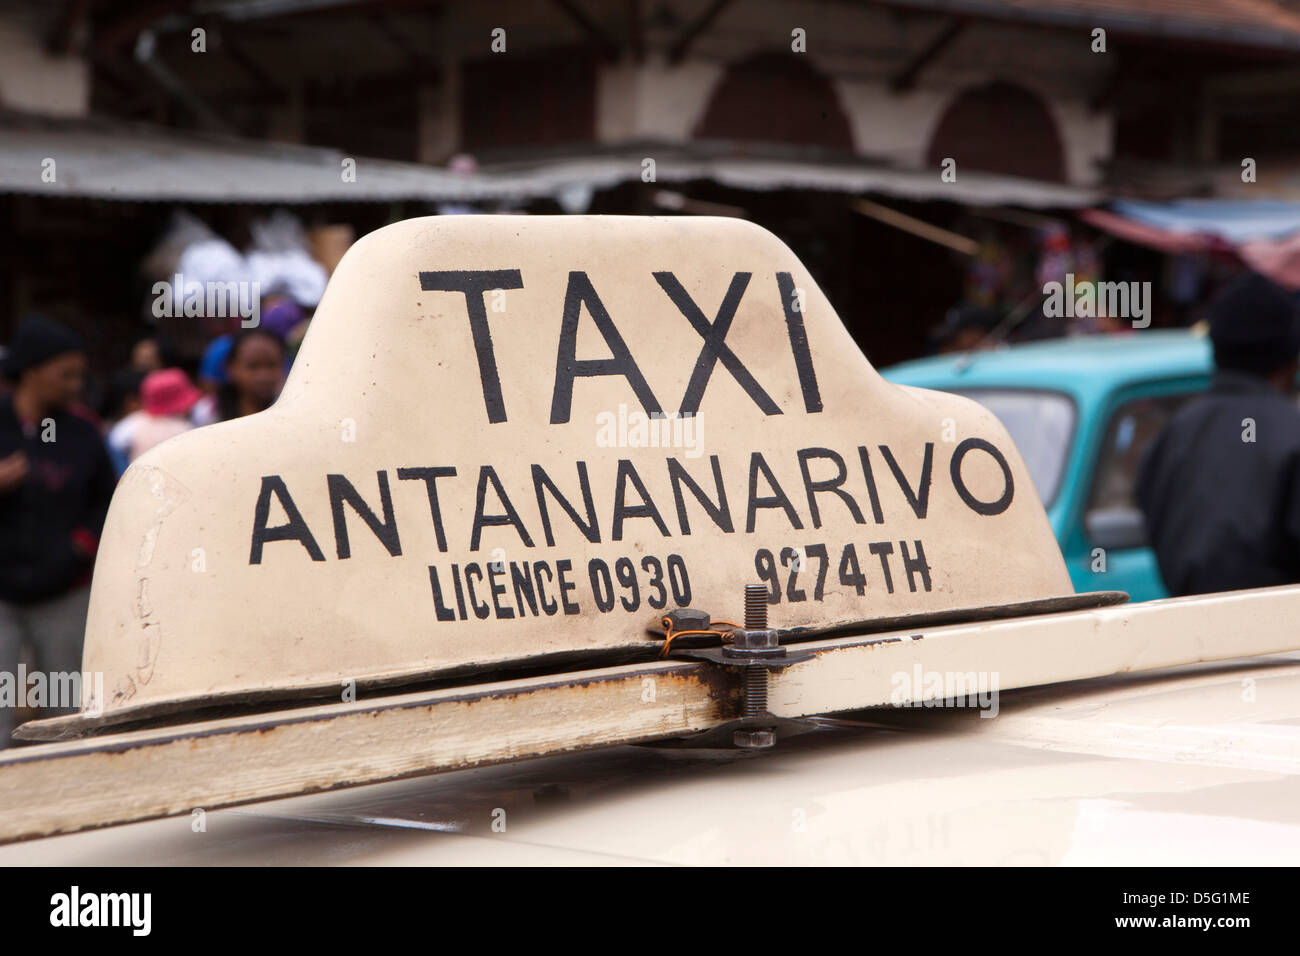 Madagascar, Antananarivo, Analakely Market, transport, taxi sign on top of cab Stock Photo